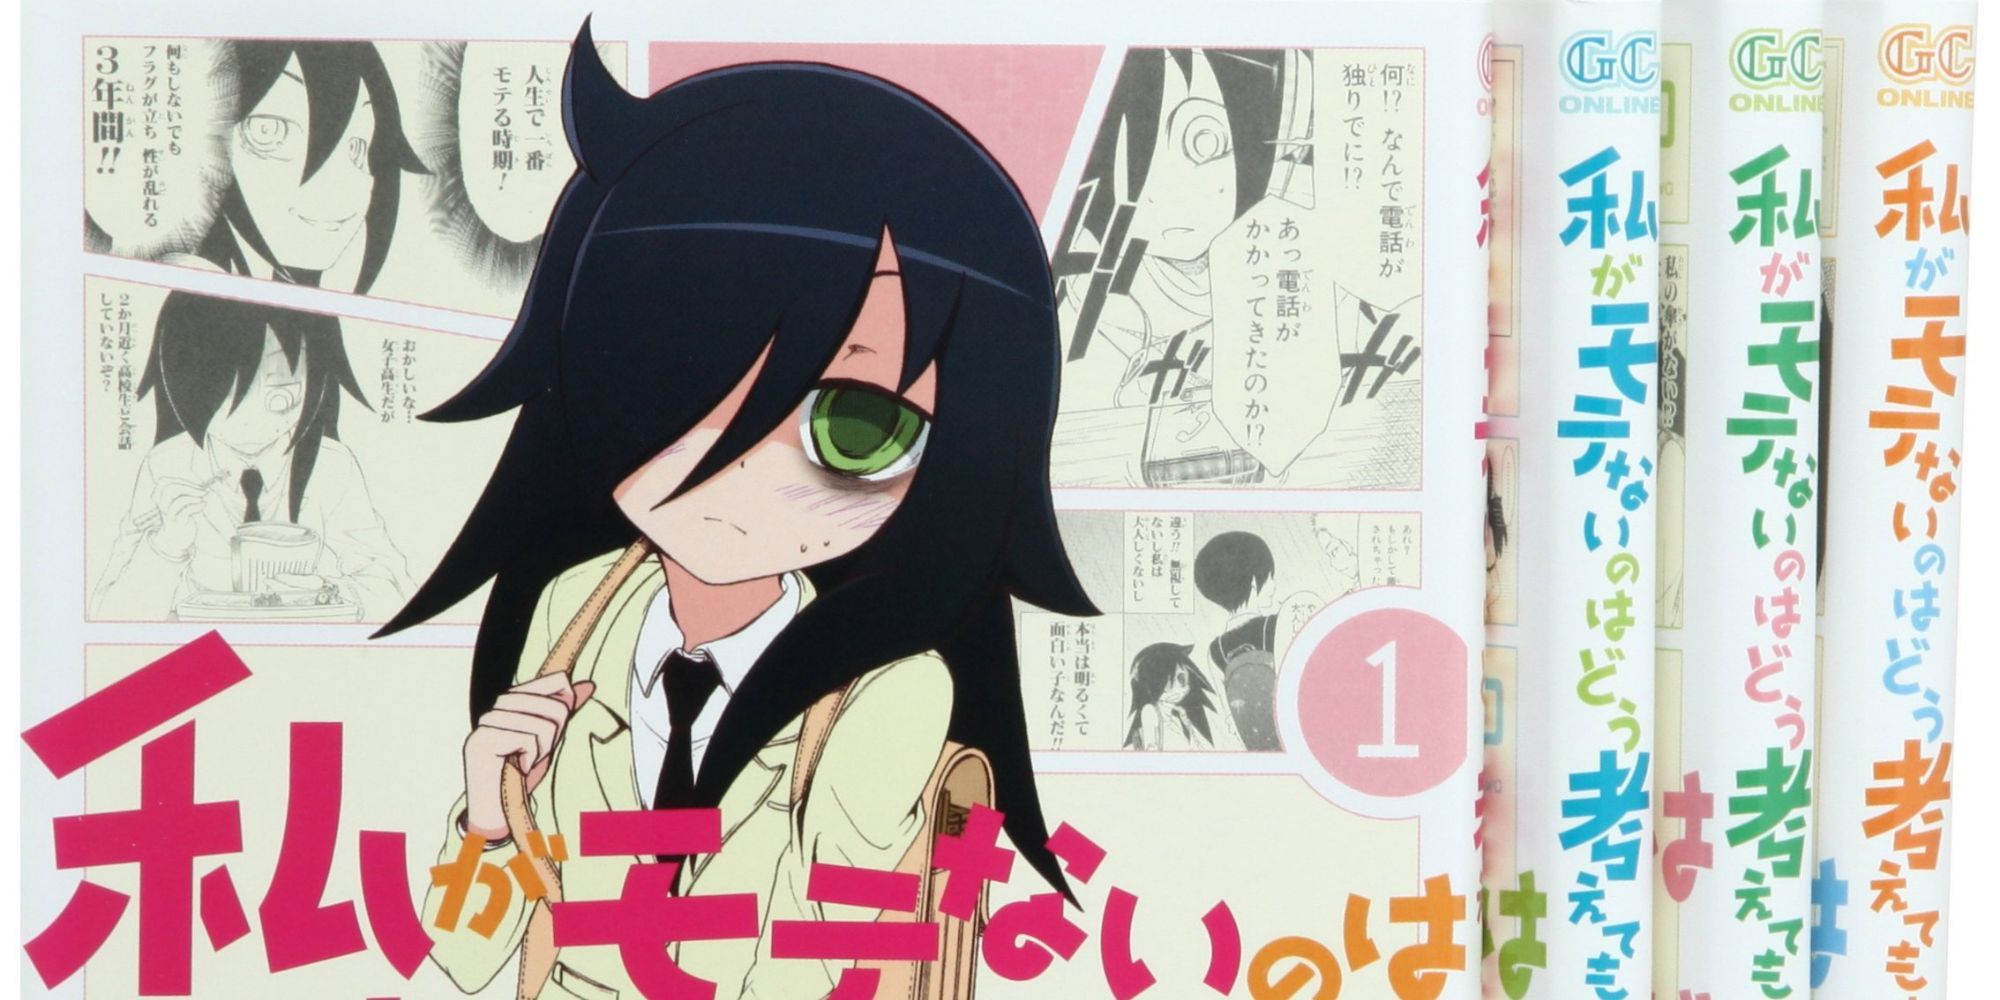 The cover of WataMote featuring the main character